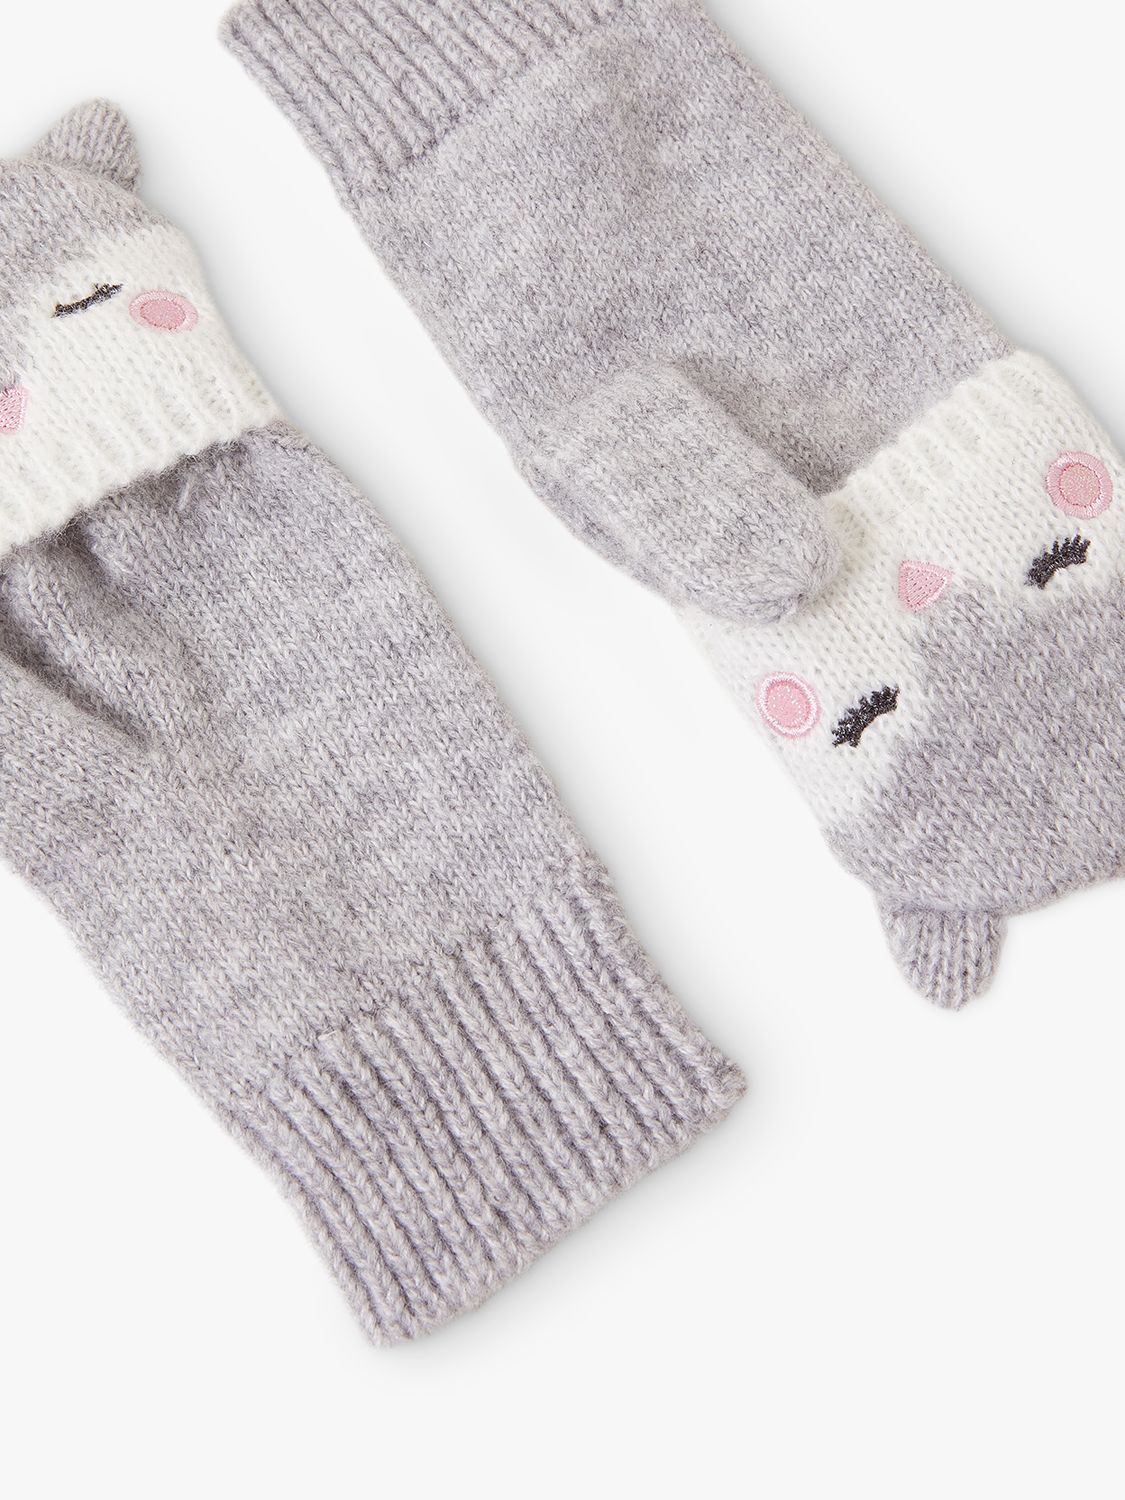 Buy Angels by Accessorize Kids' Snow Fox Gloves, Grey/Multi Online at johnlewis.com